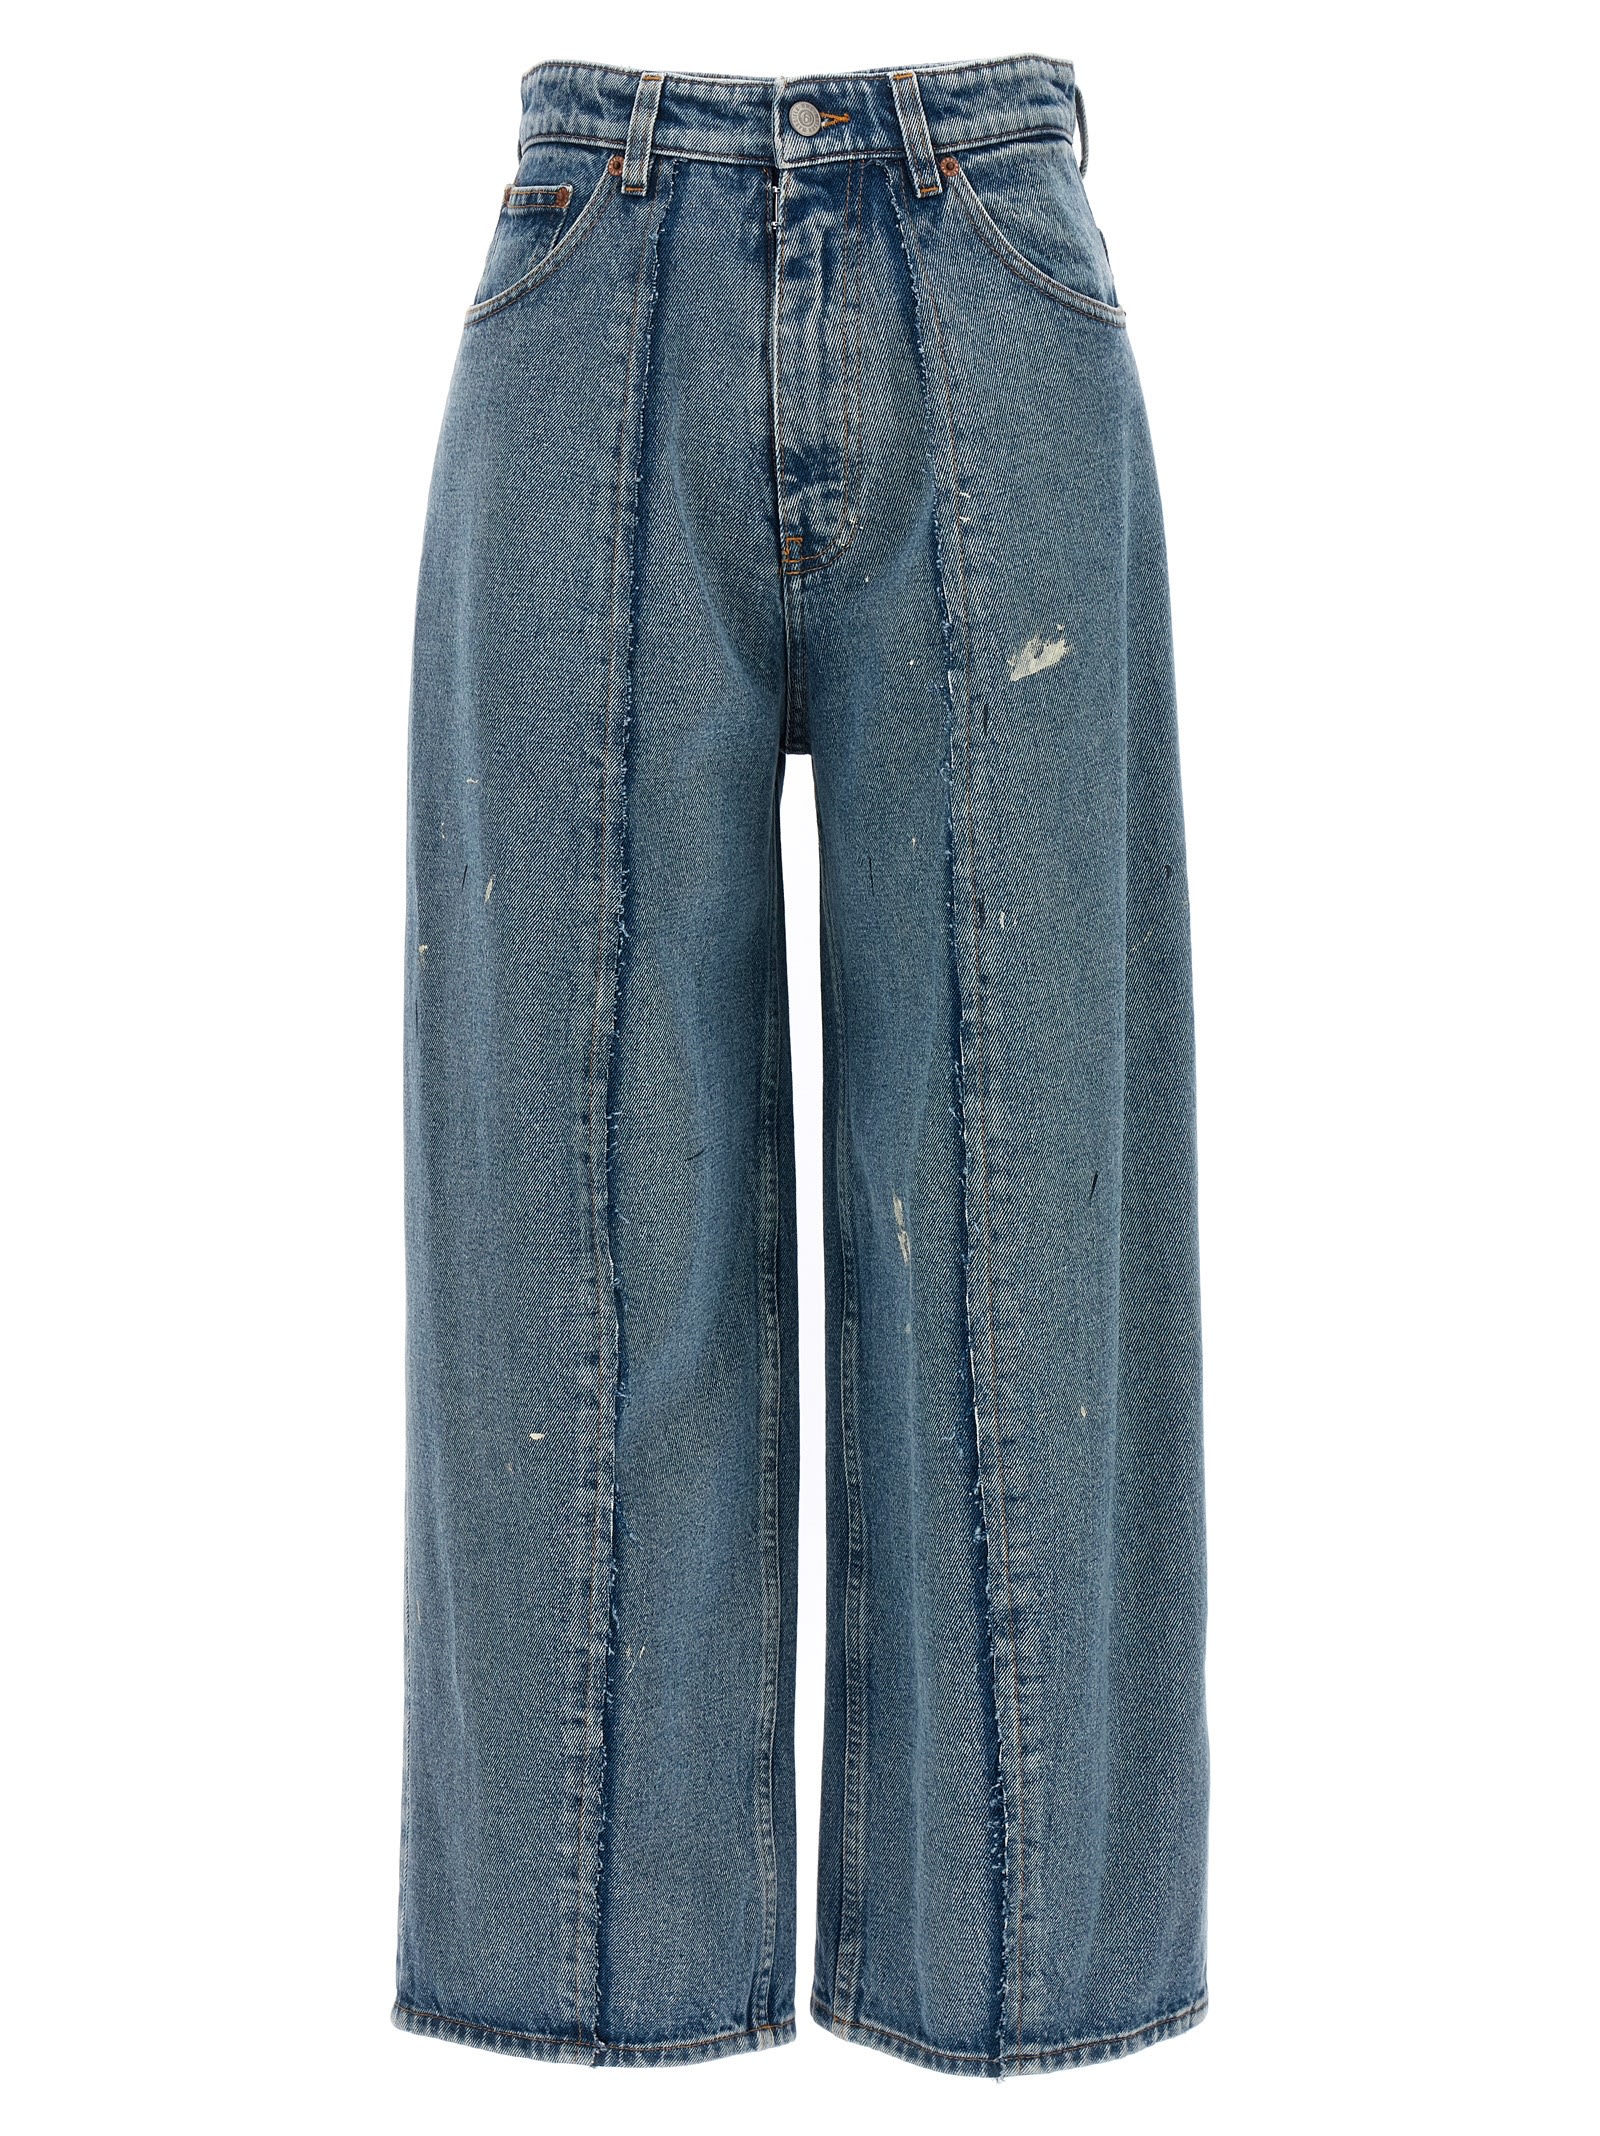 Used Effect Jeans